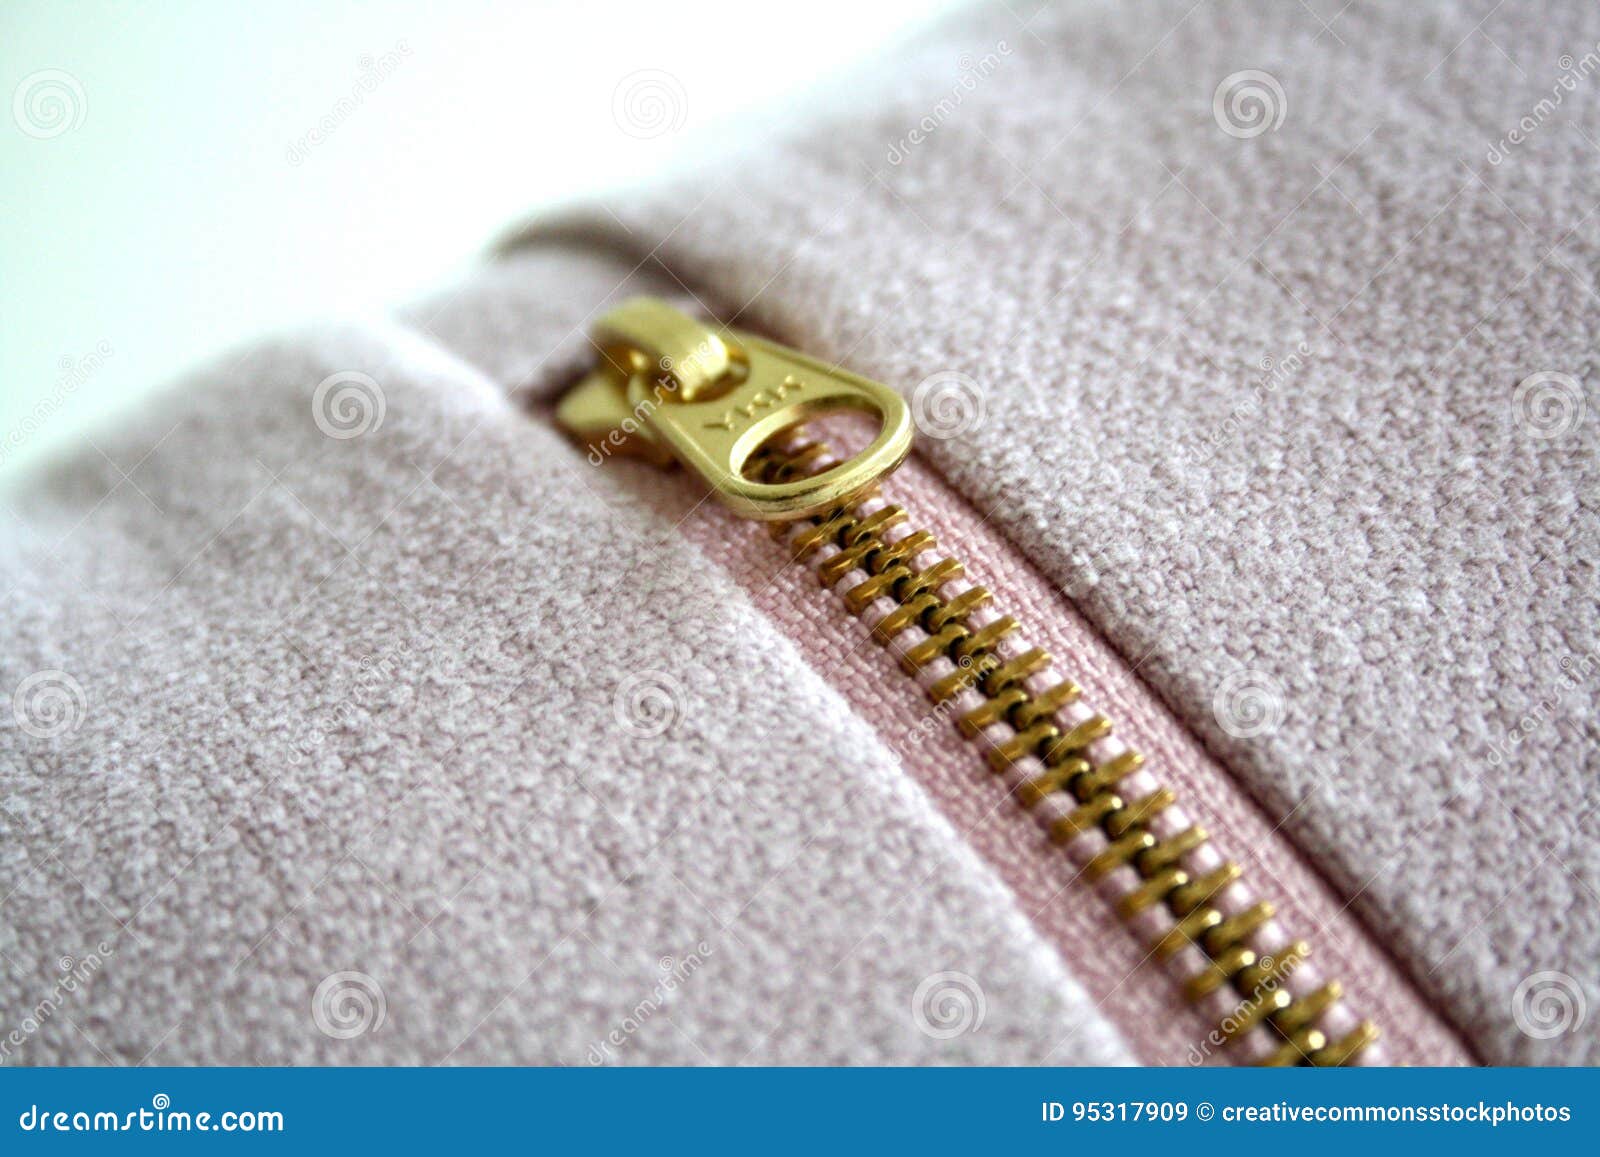 Zipper On Piece Of Clothing Picture. Image: 95317909